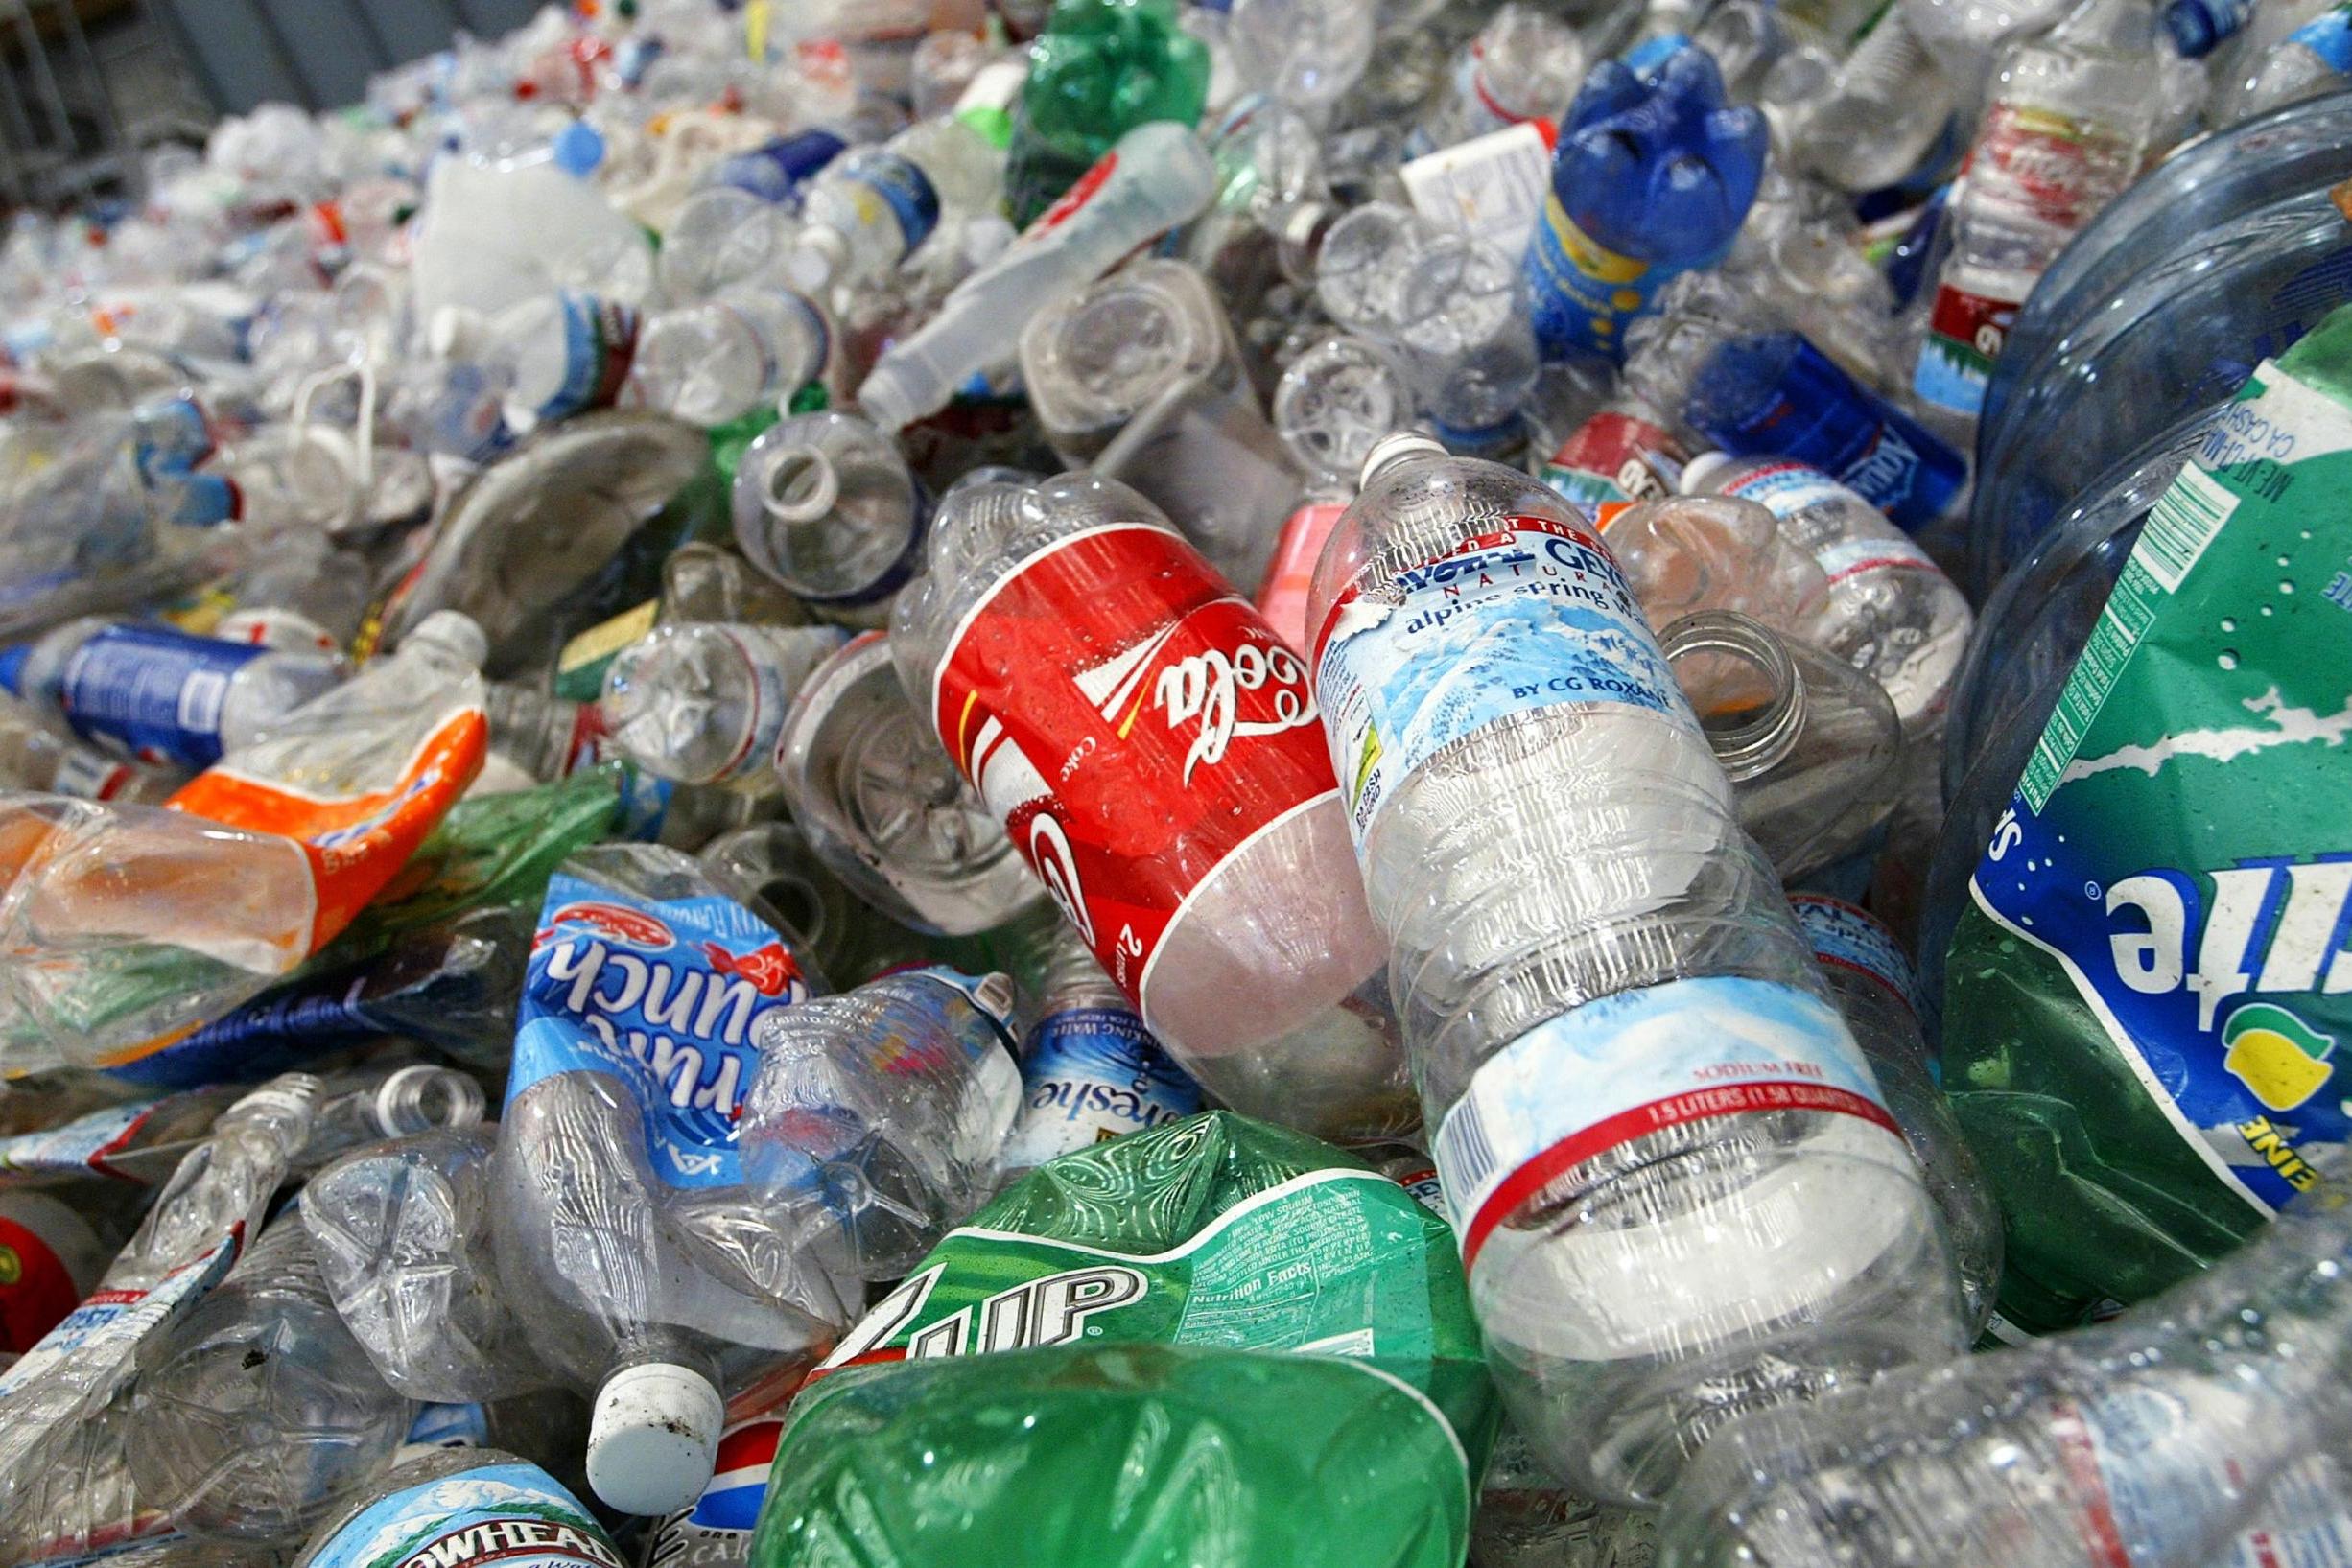 Picture: Recycled plastic bottles are seen at the San Francisco Recycling Center